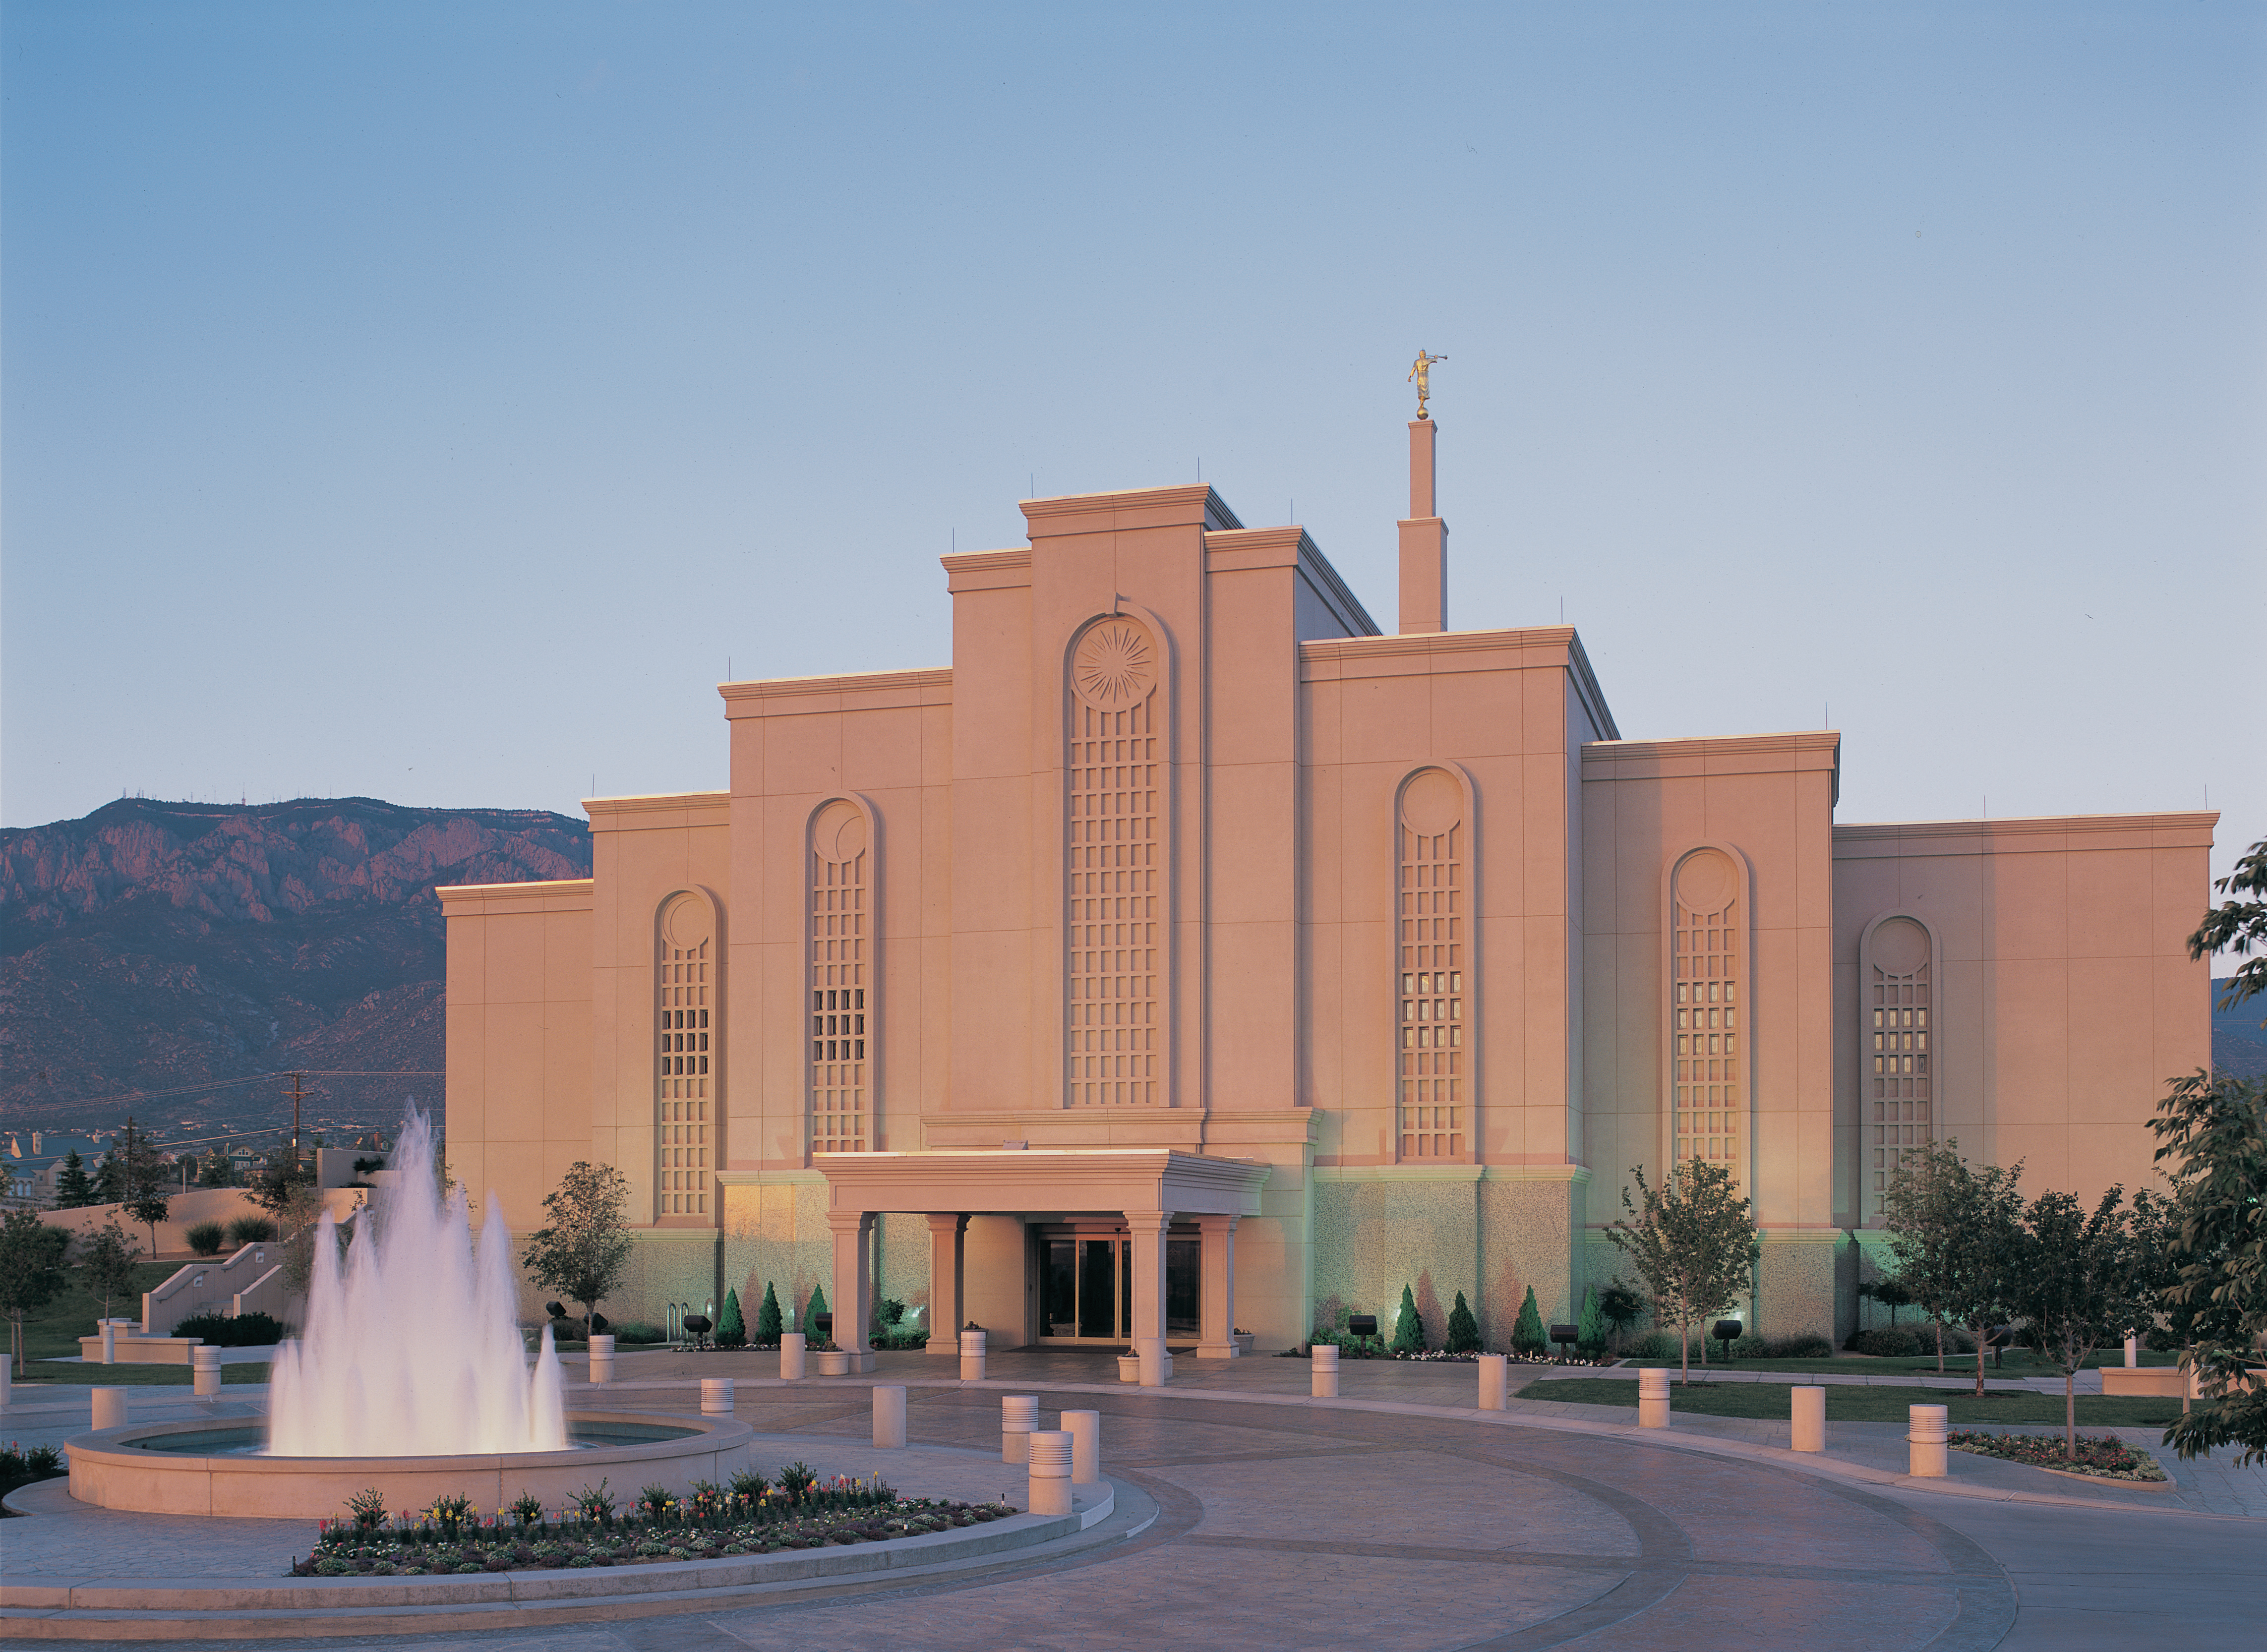 A view from the front of the Albuquerque New Mexico Temple and the water fountain in the early evening, just after the lights have come on.